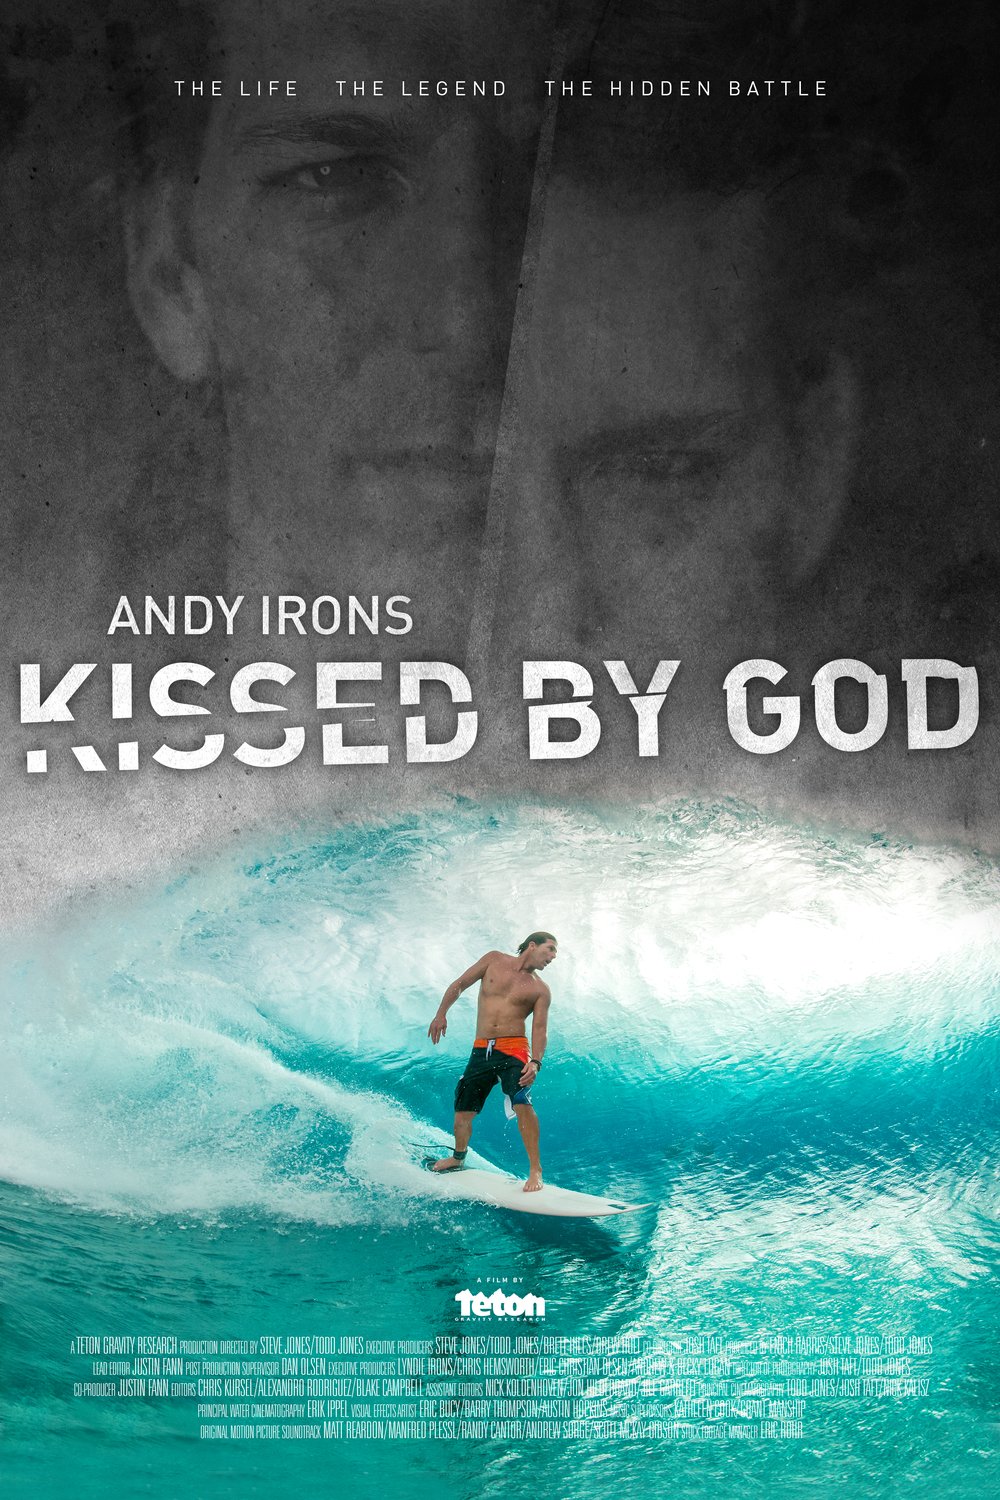 Poster of the movie Andy Irons: Kissed by God